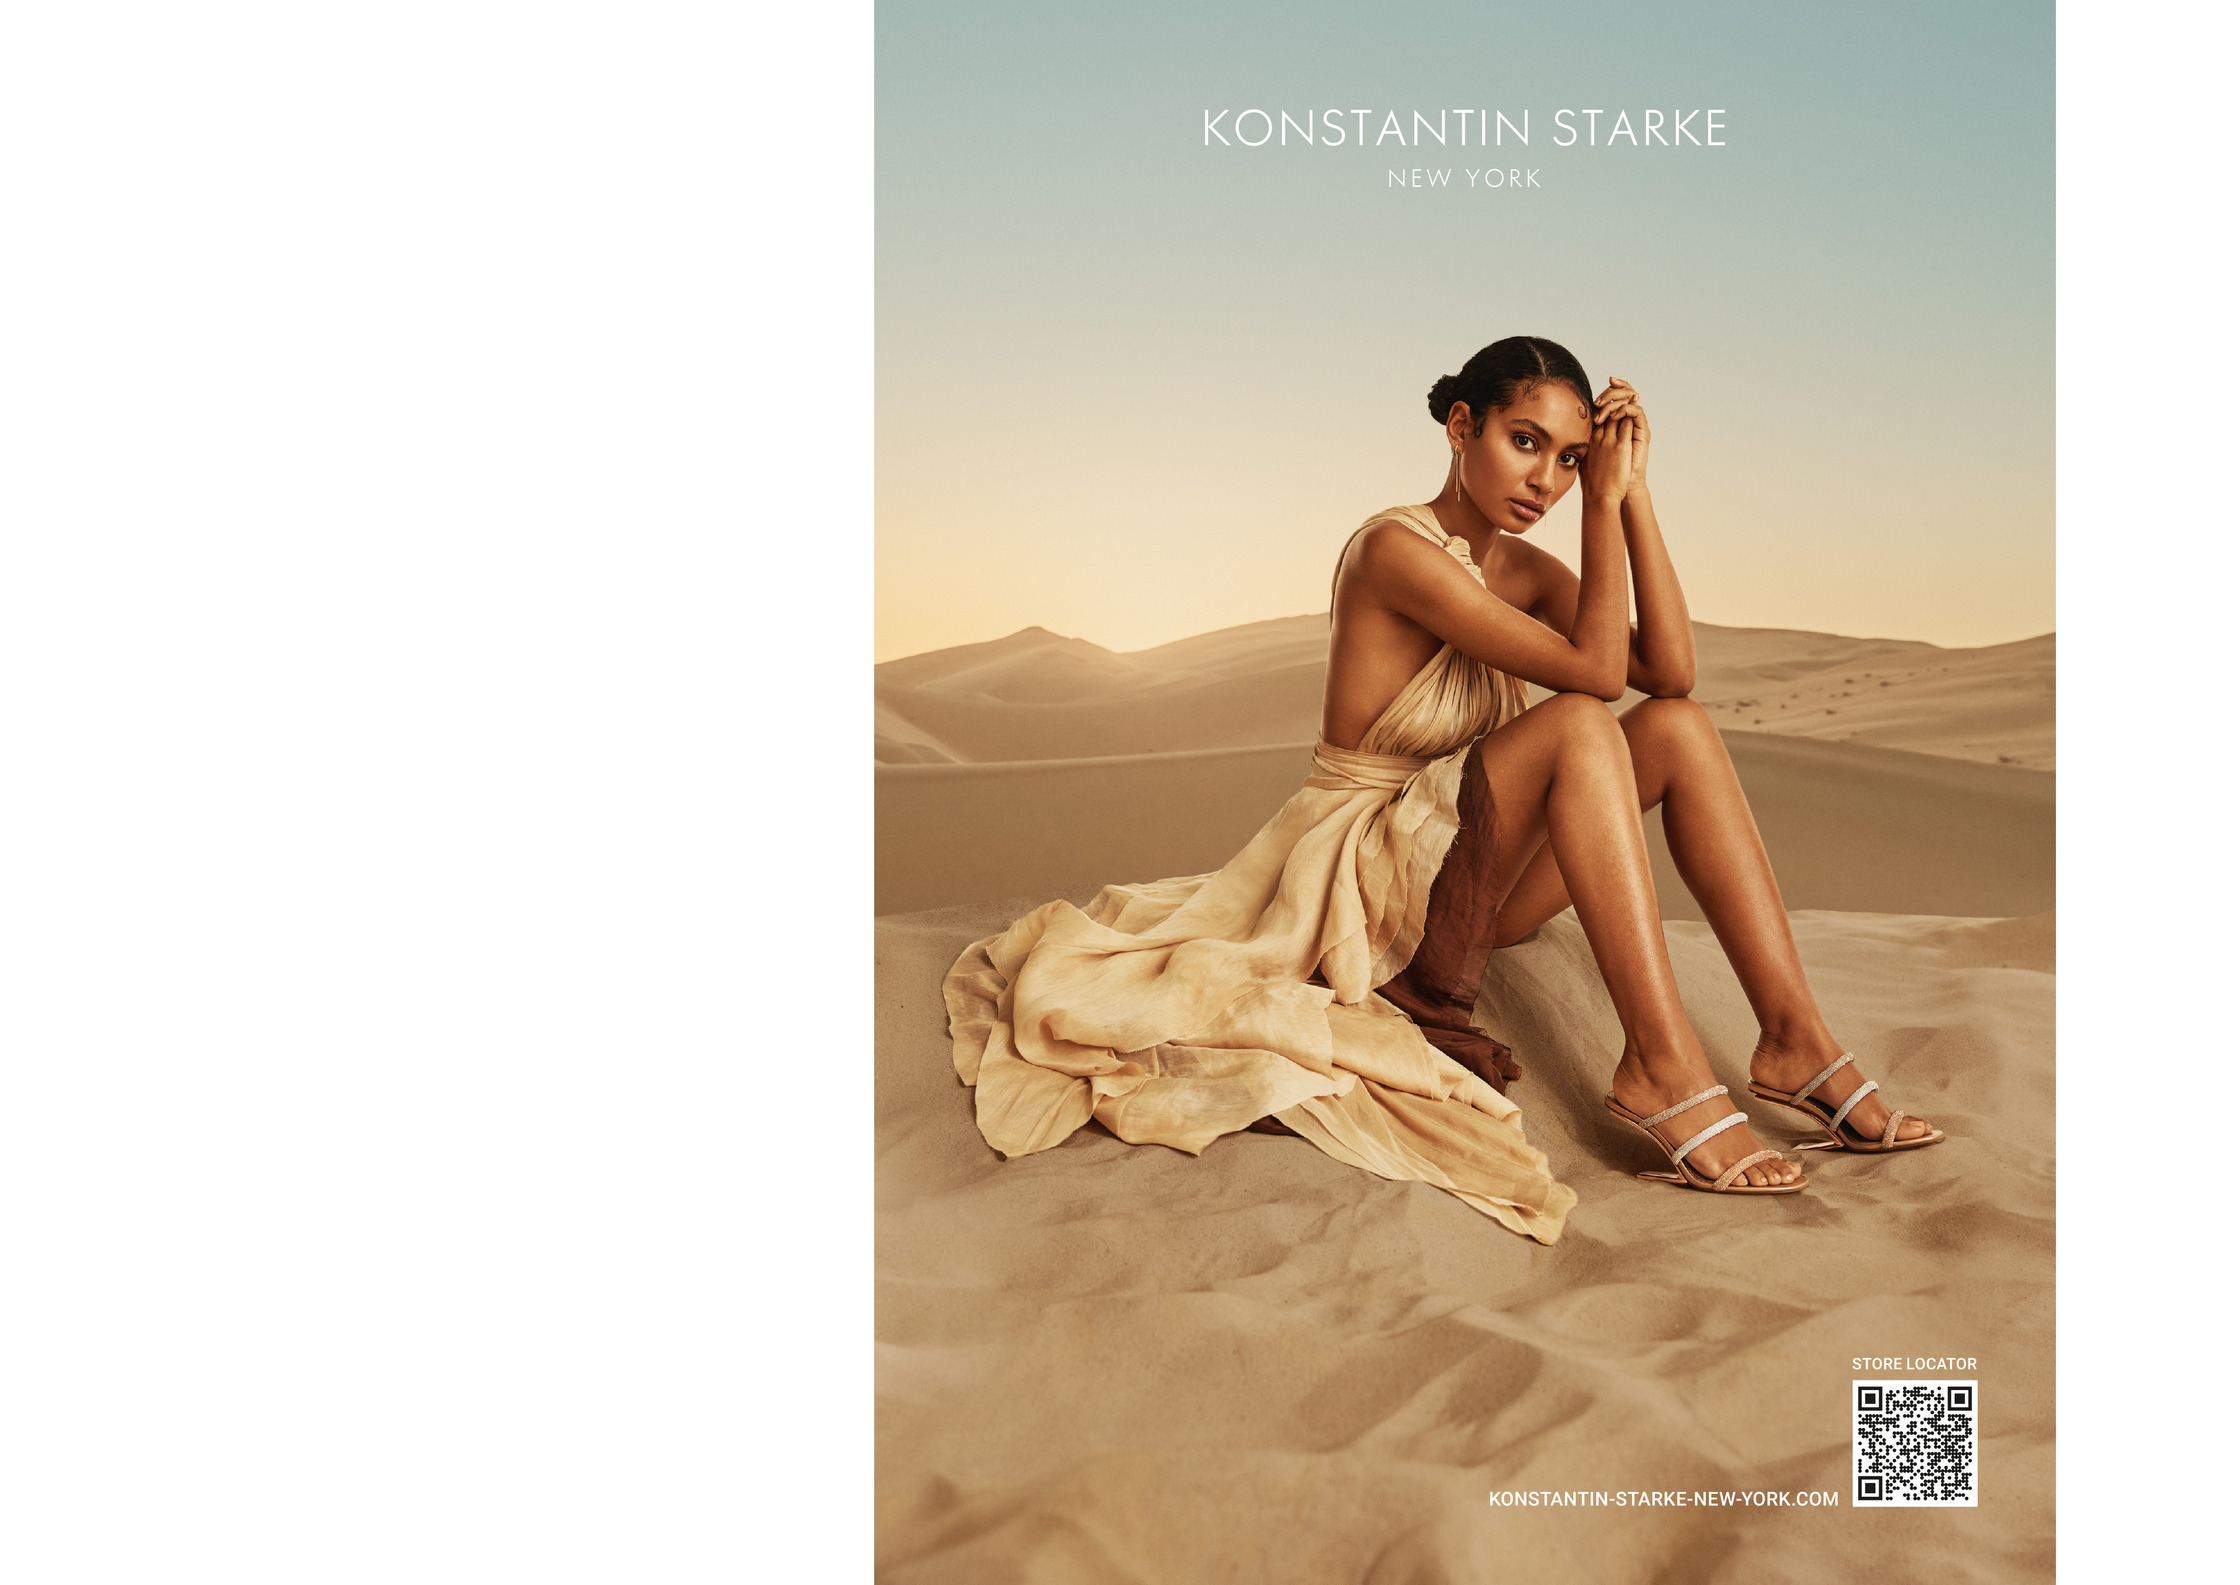 a woman in a dress sitting on a sand dune. advertising key visual for konstantin starke new york.